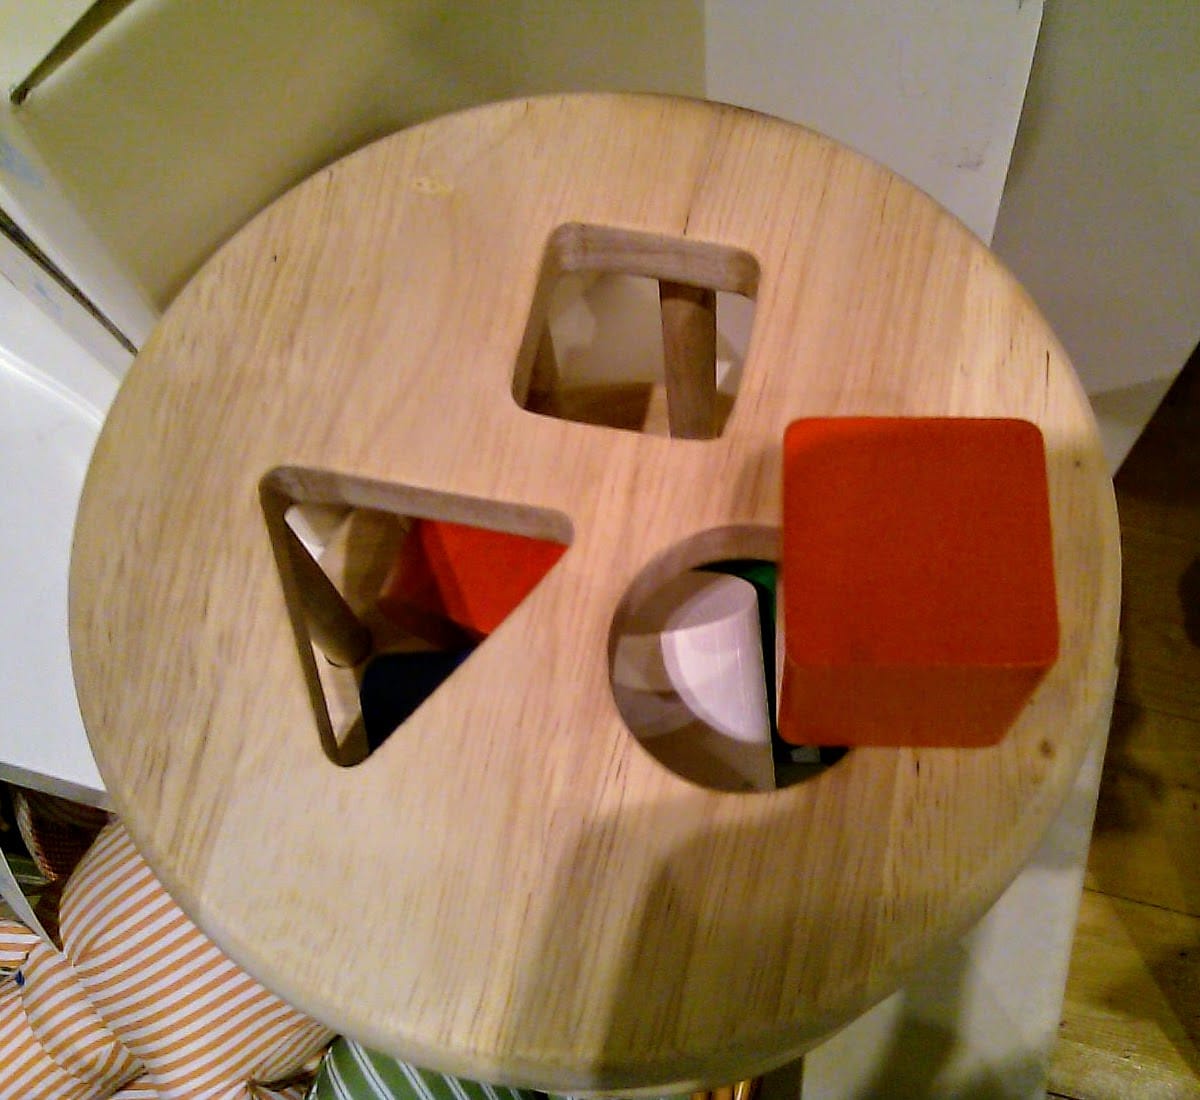 Child's toy with a square peg over a round hole. There is also triangle and square holes.